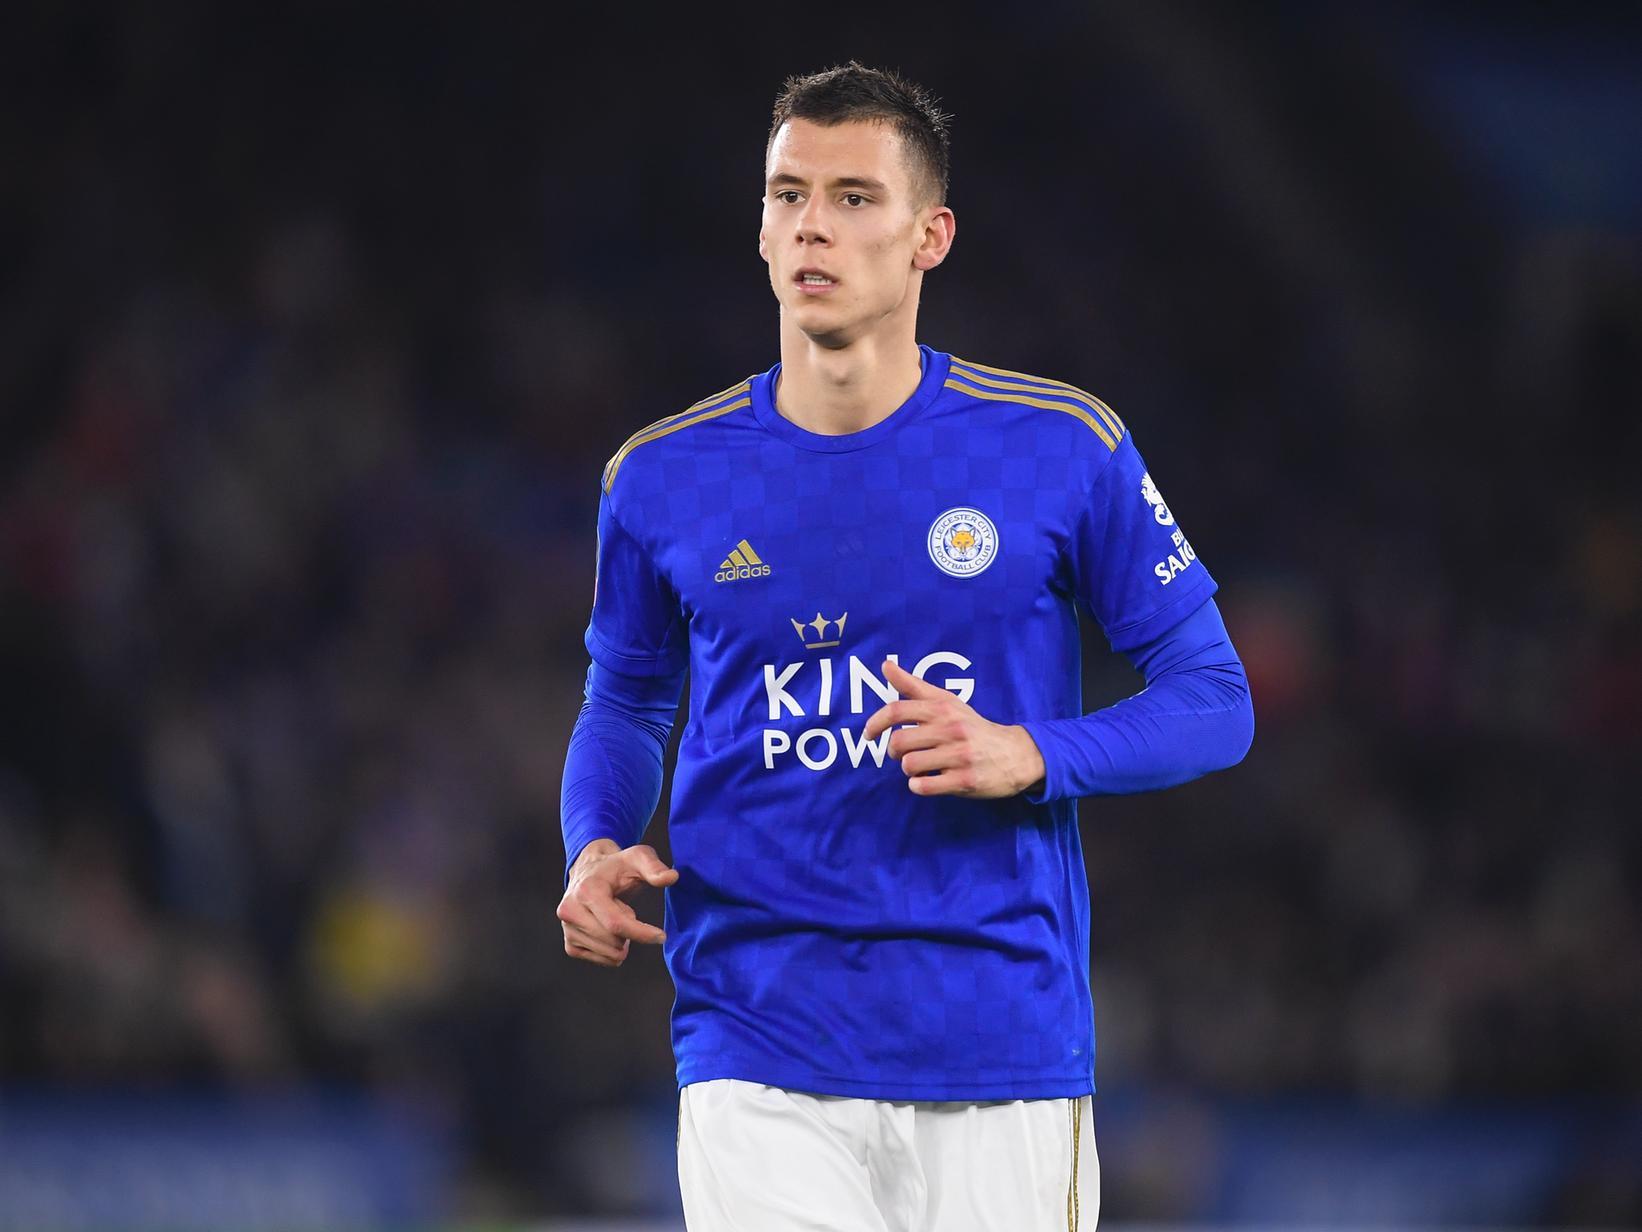 Middlesbrough have been tipped to beat Celtic to Leicester City defender Filip Benkovic, despite the Croatia international spending last season on loan with the Scottish Premiership side. (Daily Mail)